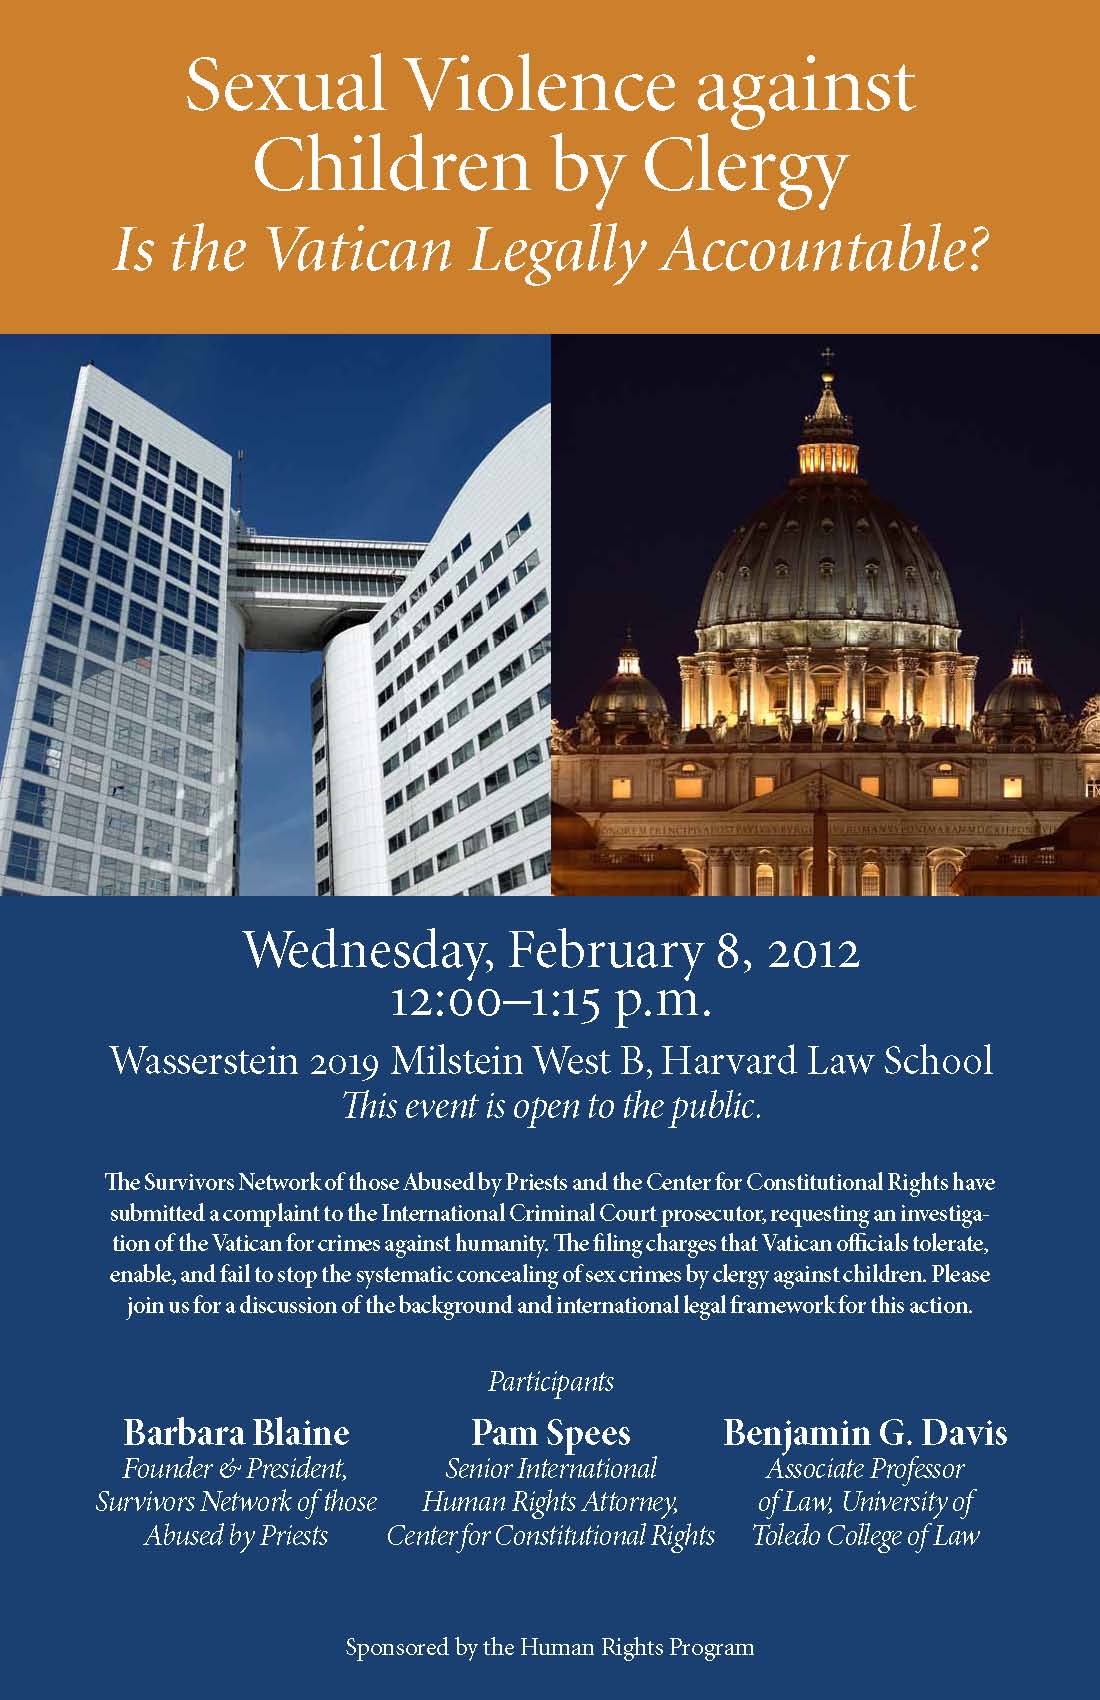 Event poster shows an image of a court juxtaposed with an image of the Vatican.